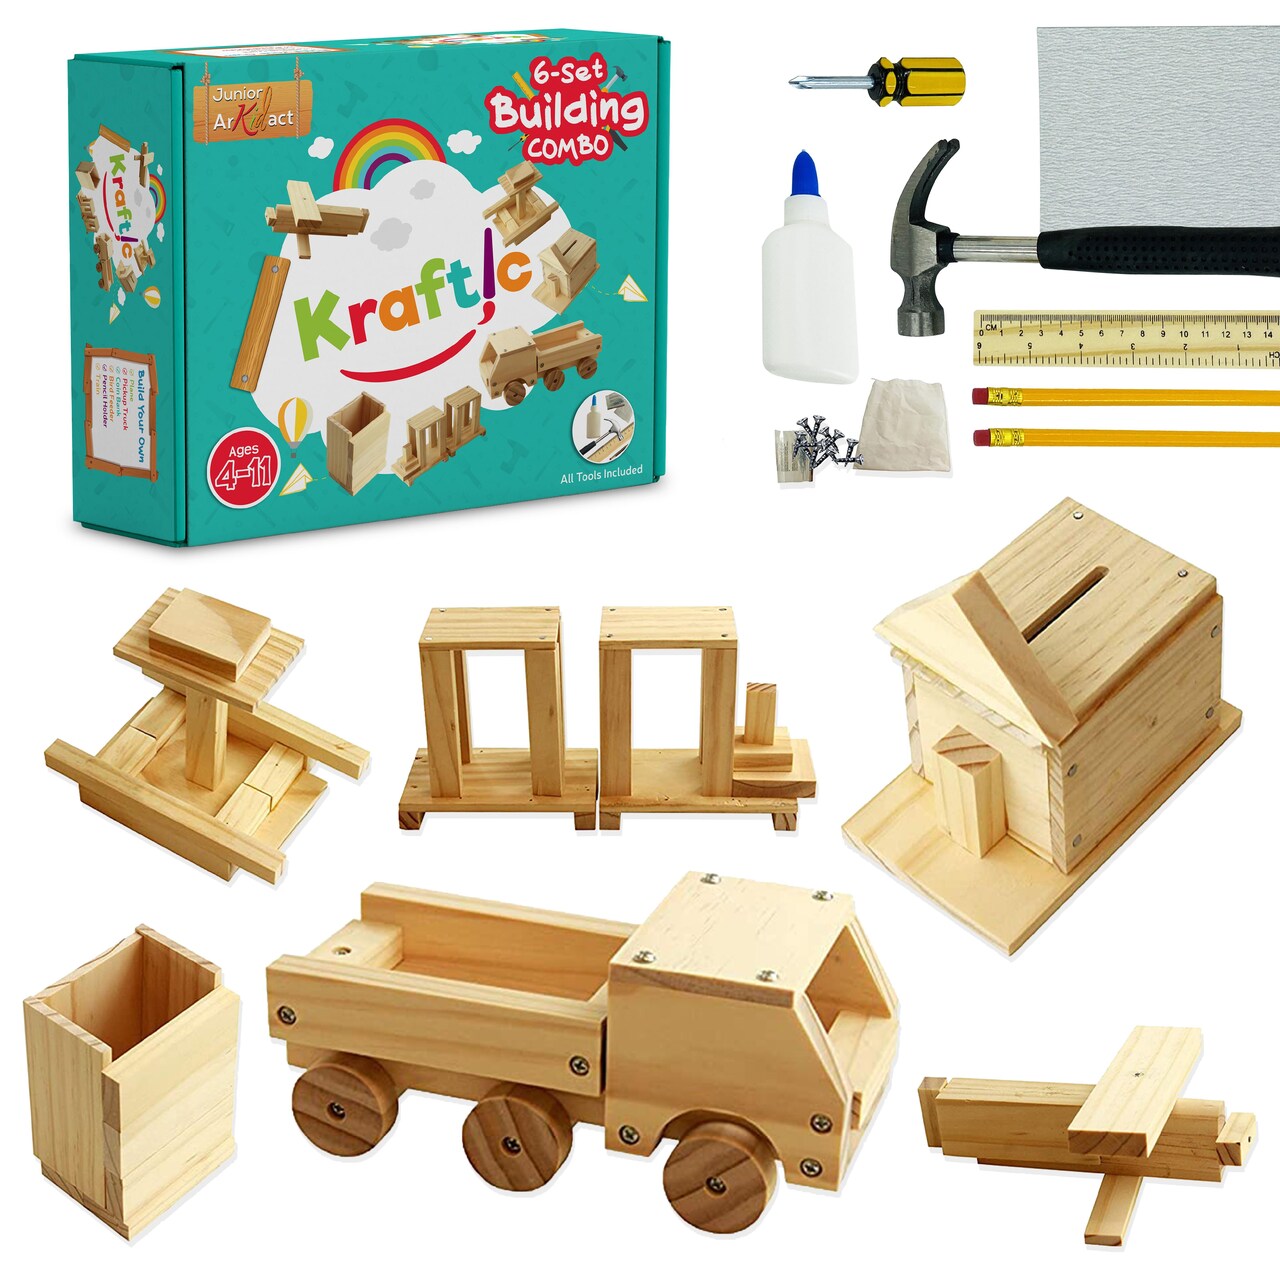 Kraftic Woodworking Building Kit for Kids and Adults, with 6 Educational  Arts and Crafts DIY Carpentry Construction Wood Model Kit Toy Projects for  Boys and Girls